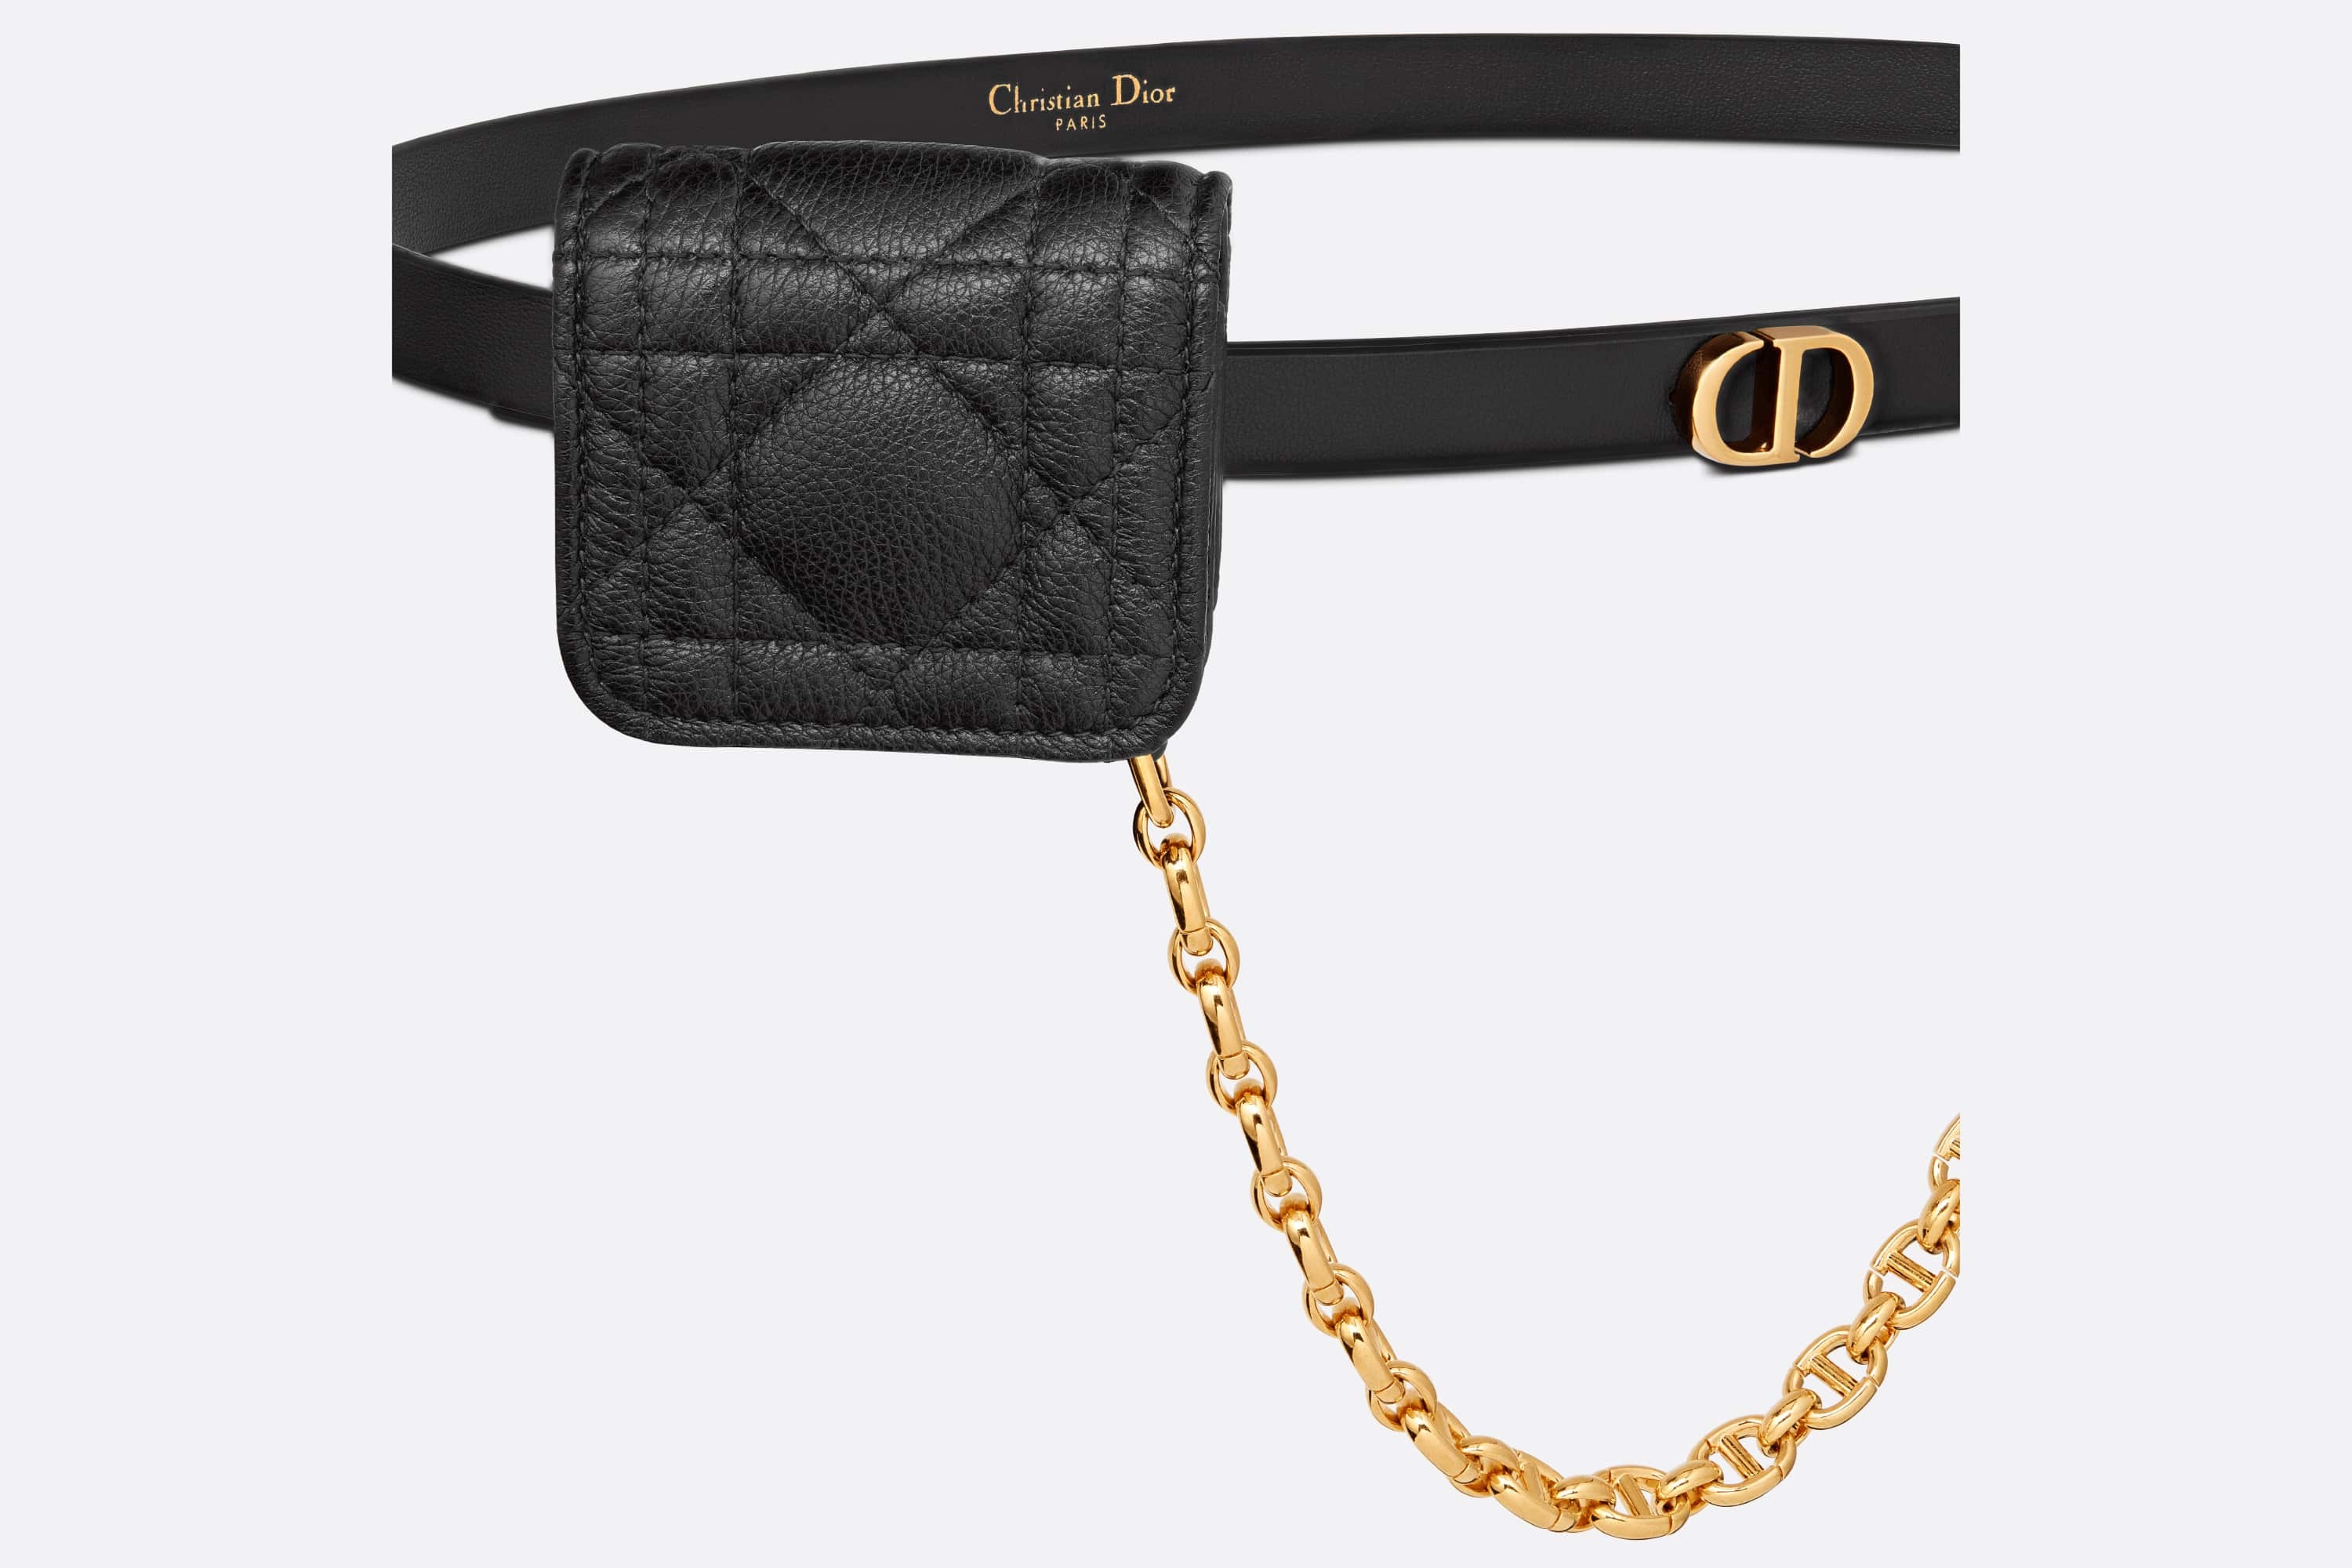 Dior Caro Belt with Removable Pouch - 2